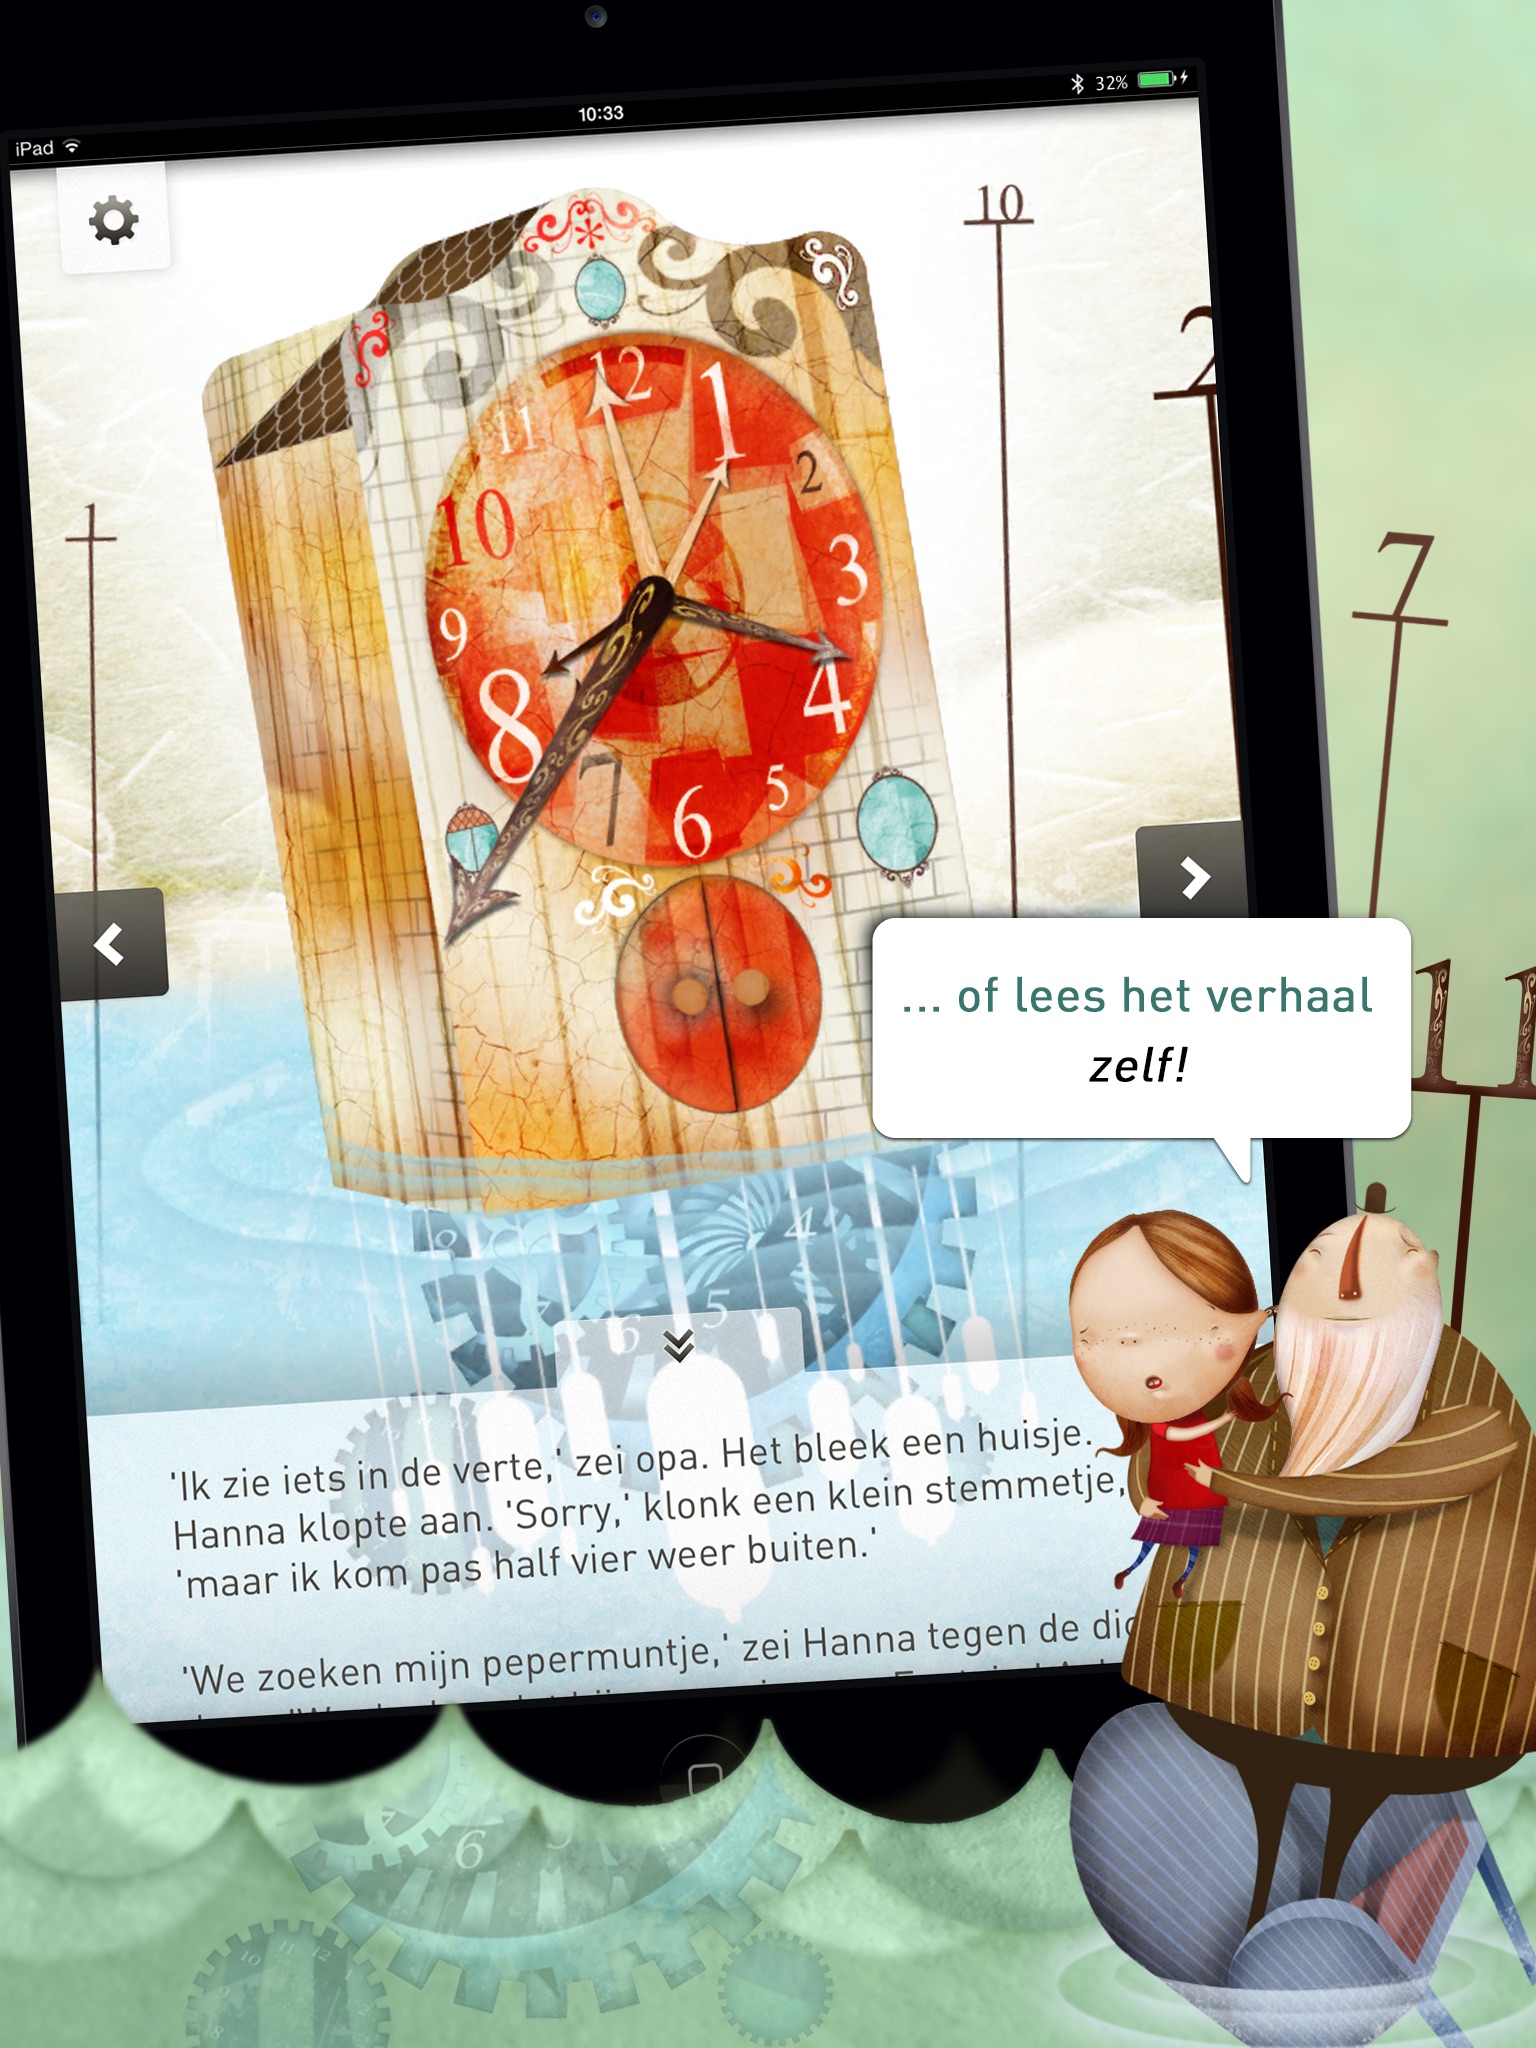 Land of Mislaid, a narrated interactive children's storybook screenshot 4